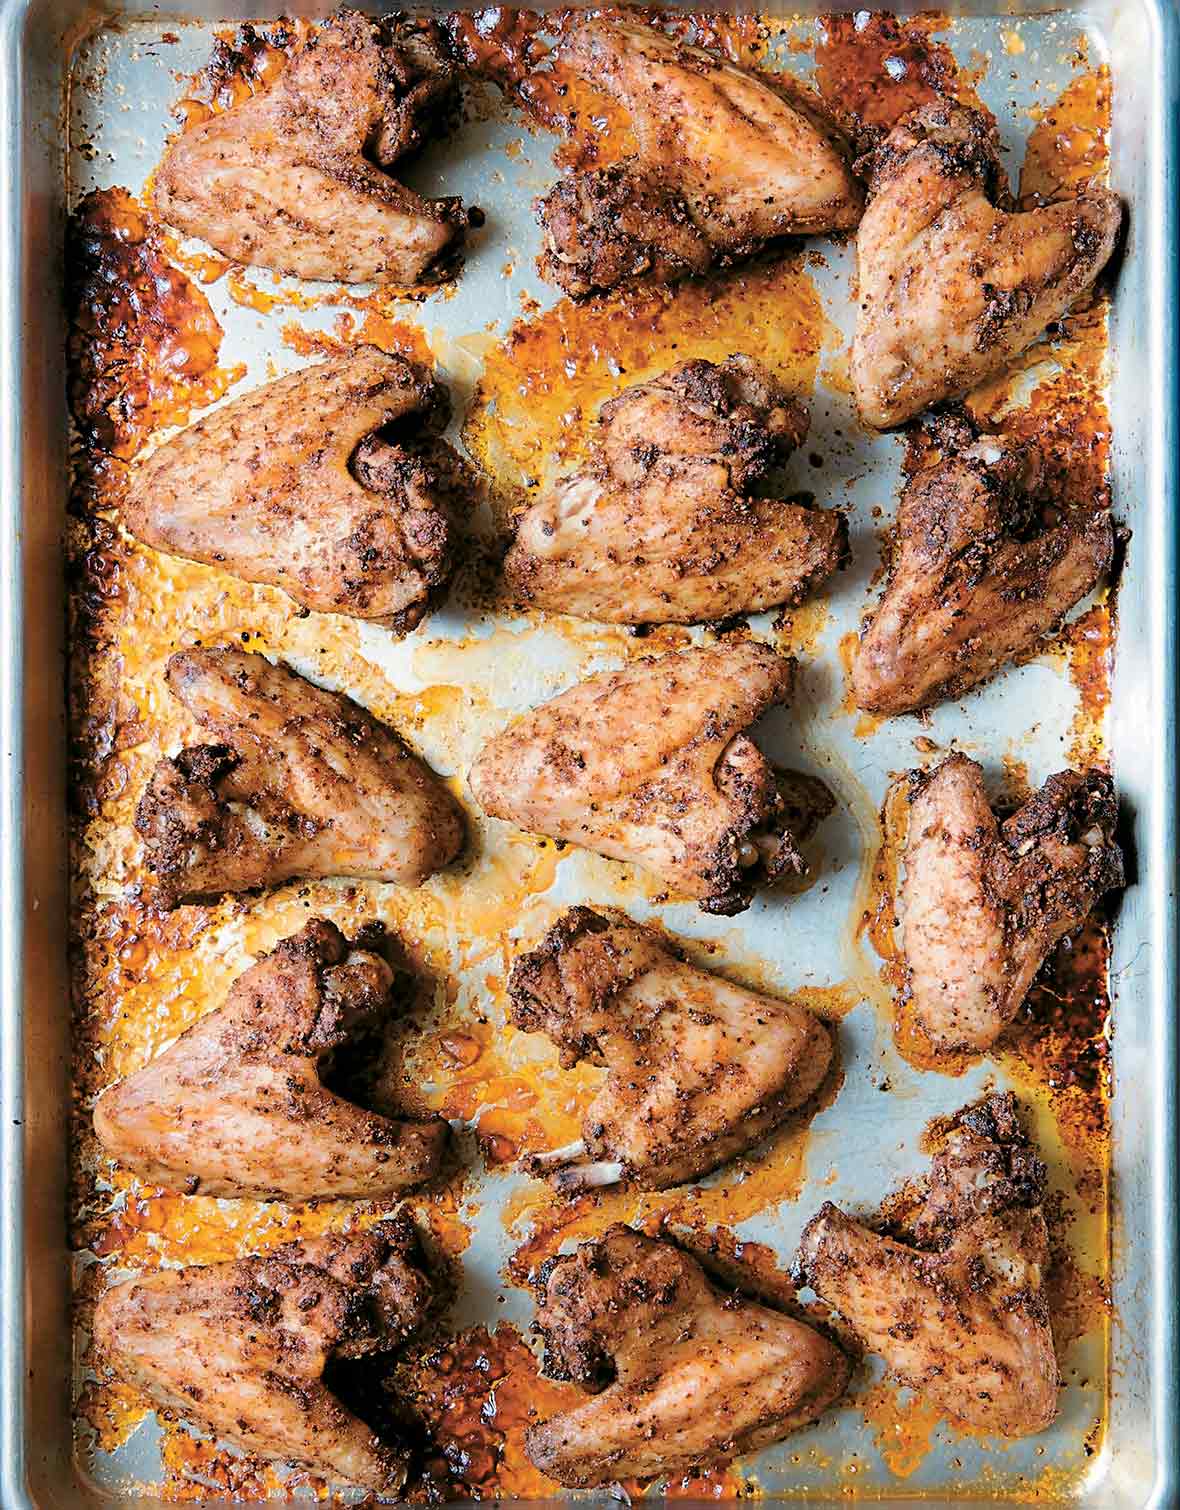 A rimmed baking sheet filled with peppery chicken wings